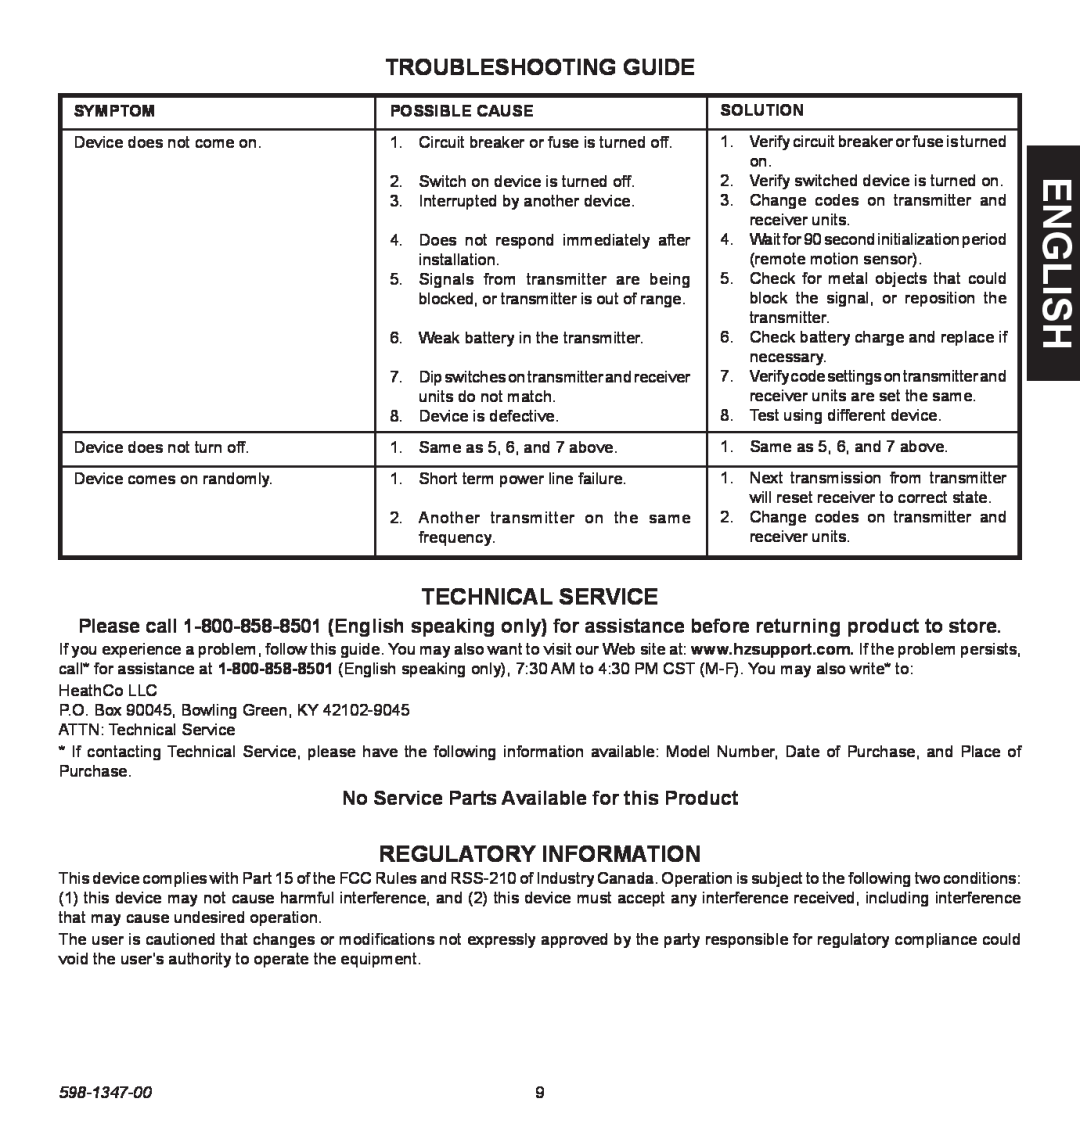 Heath Zenith 598-1347-00 operating instructions Troubleshooting Guide, Technical Service, Regulatory Information 